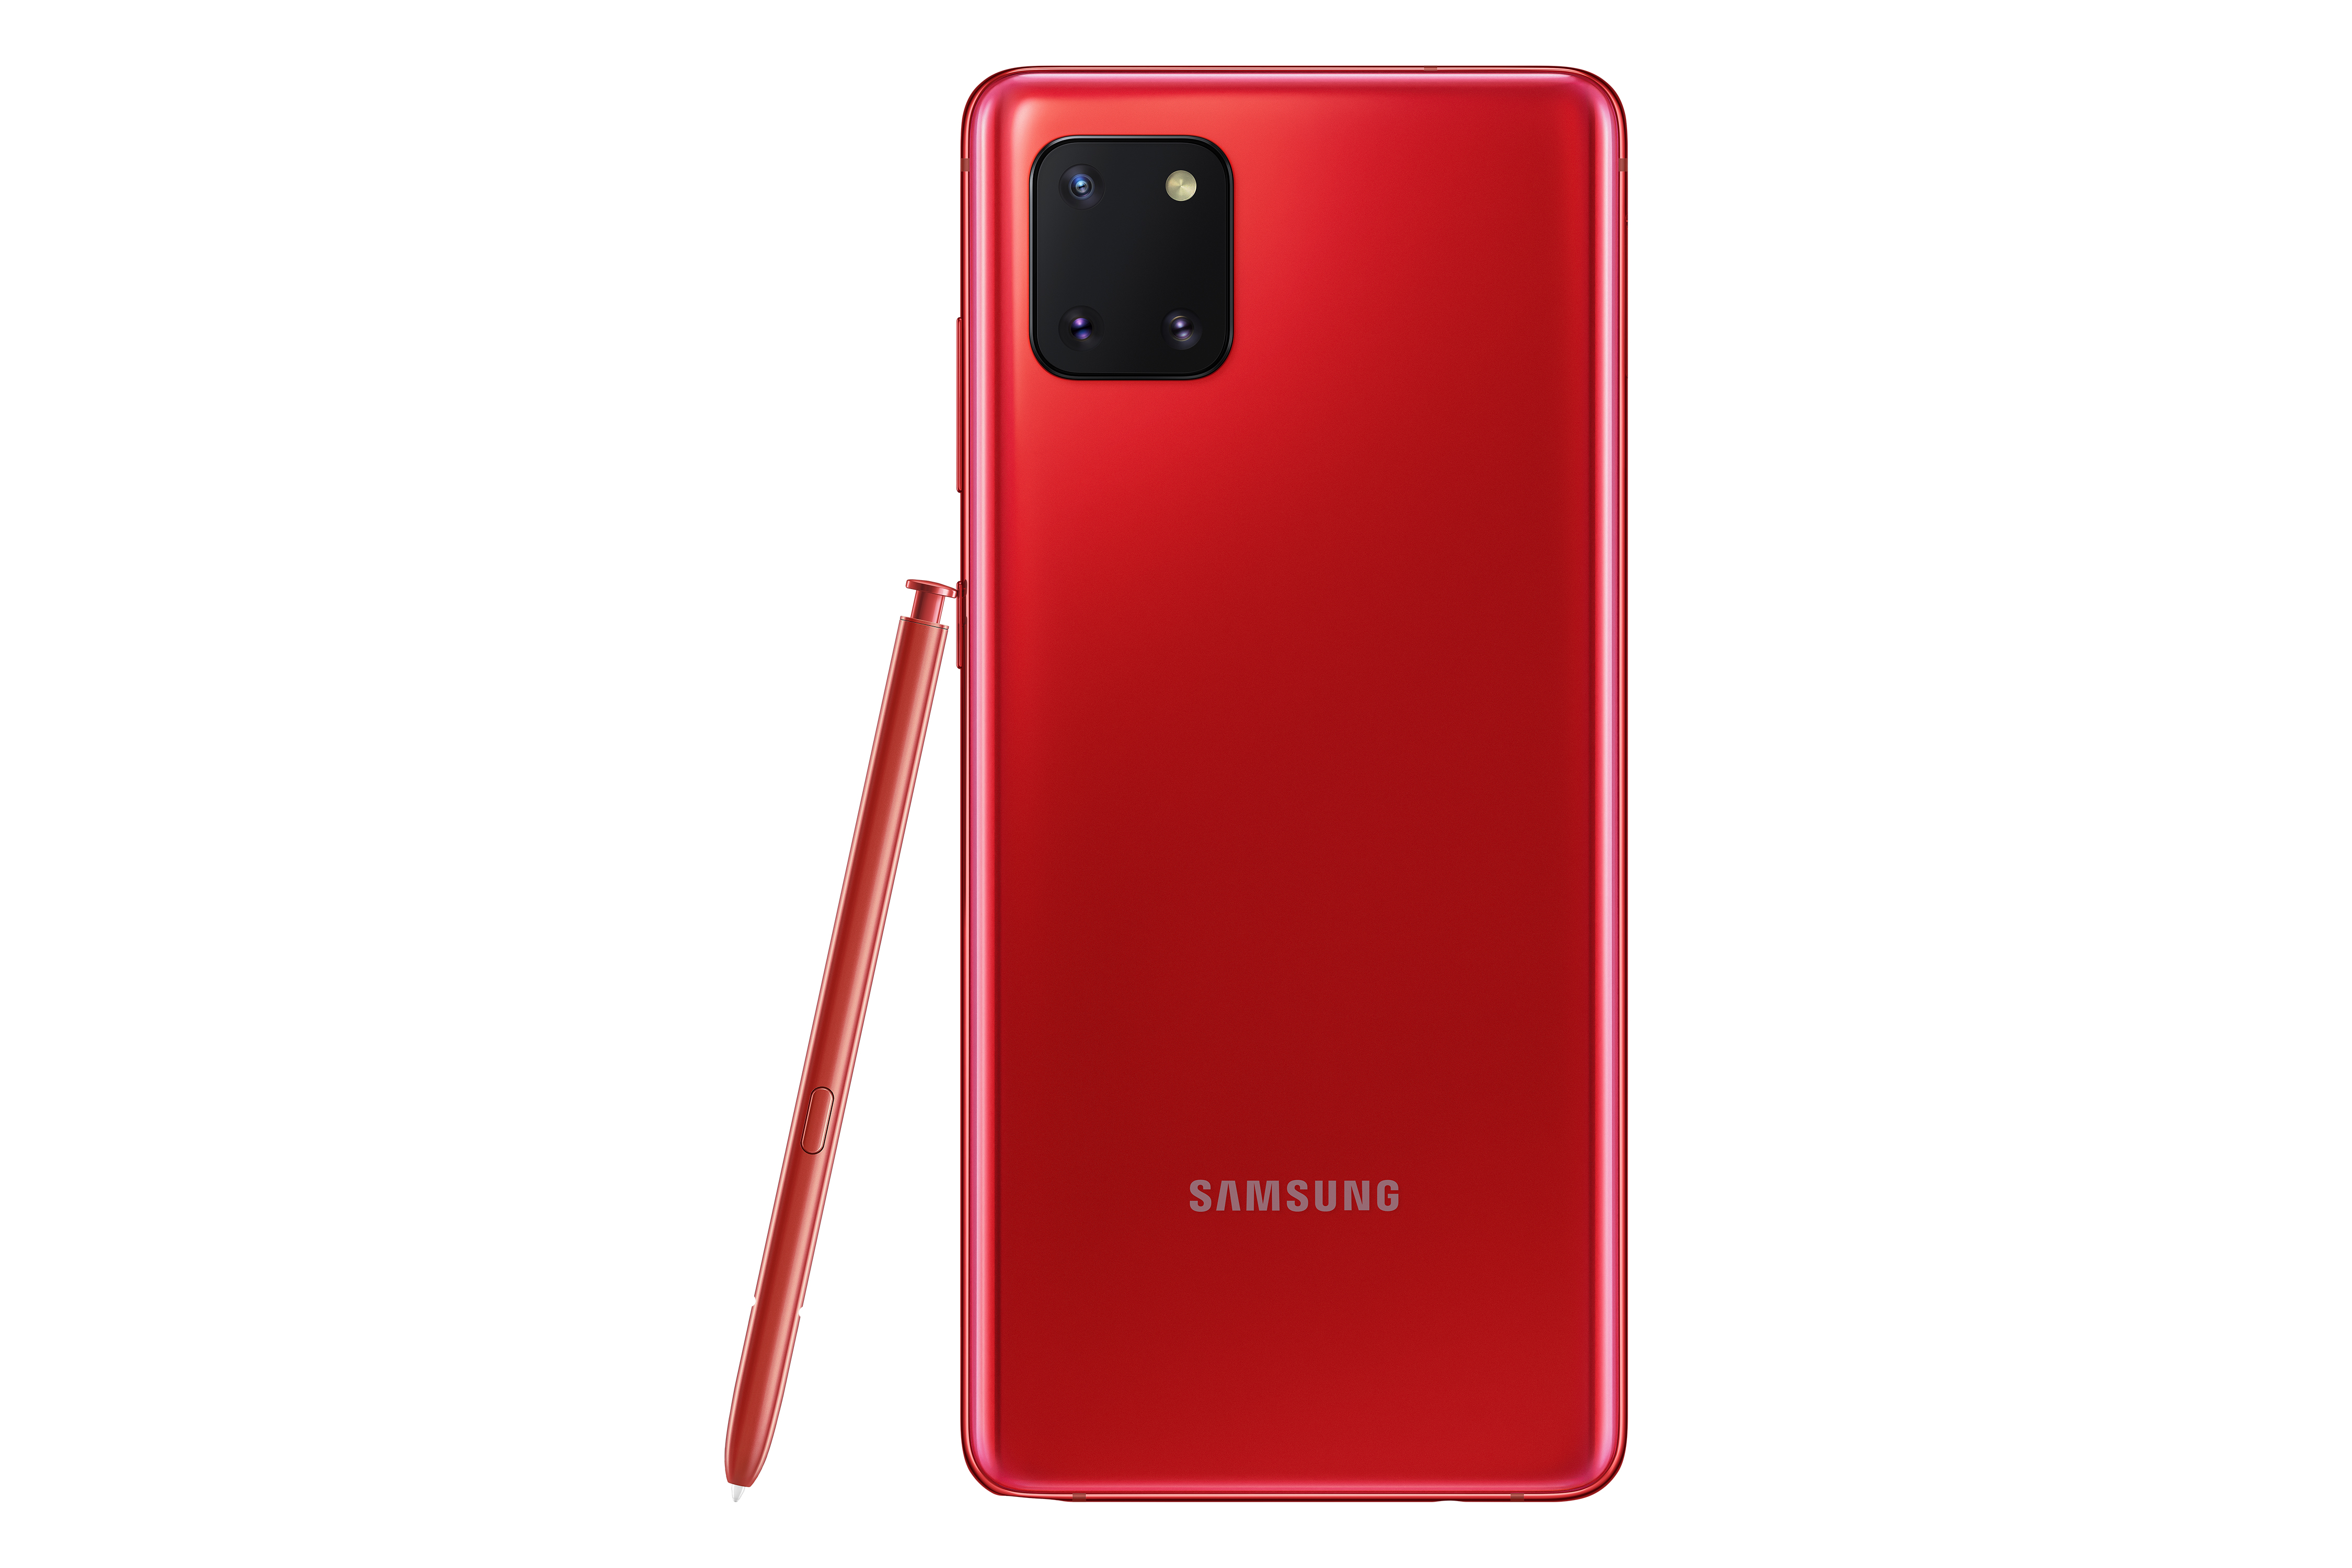 The Samsung Galaxy Note 10 Lite is a serious threat to OnePlus in India